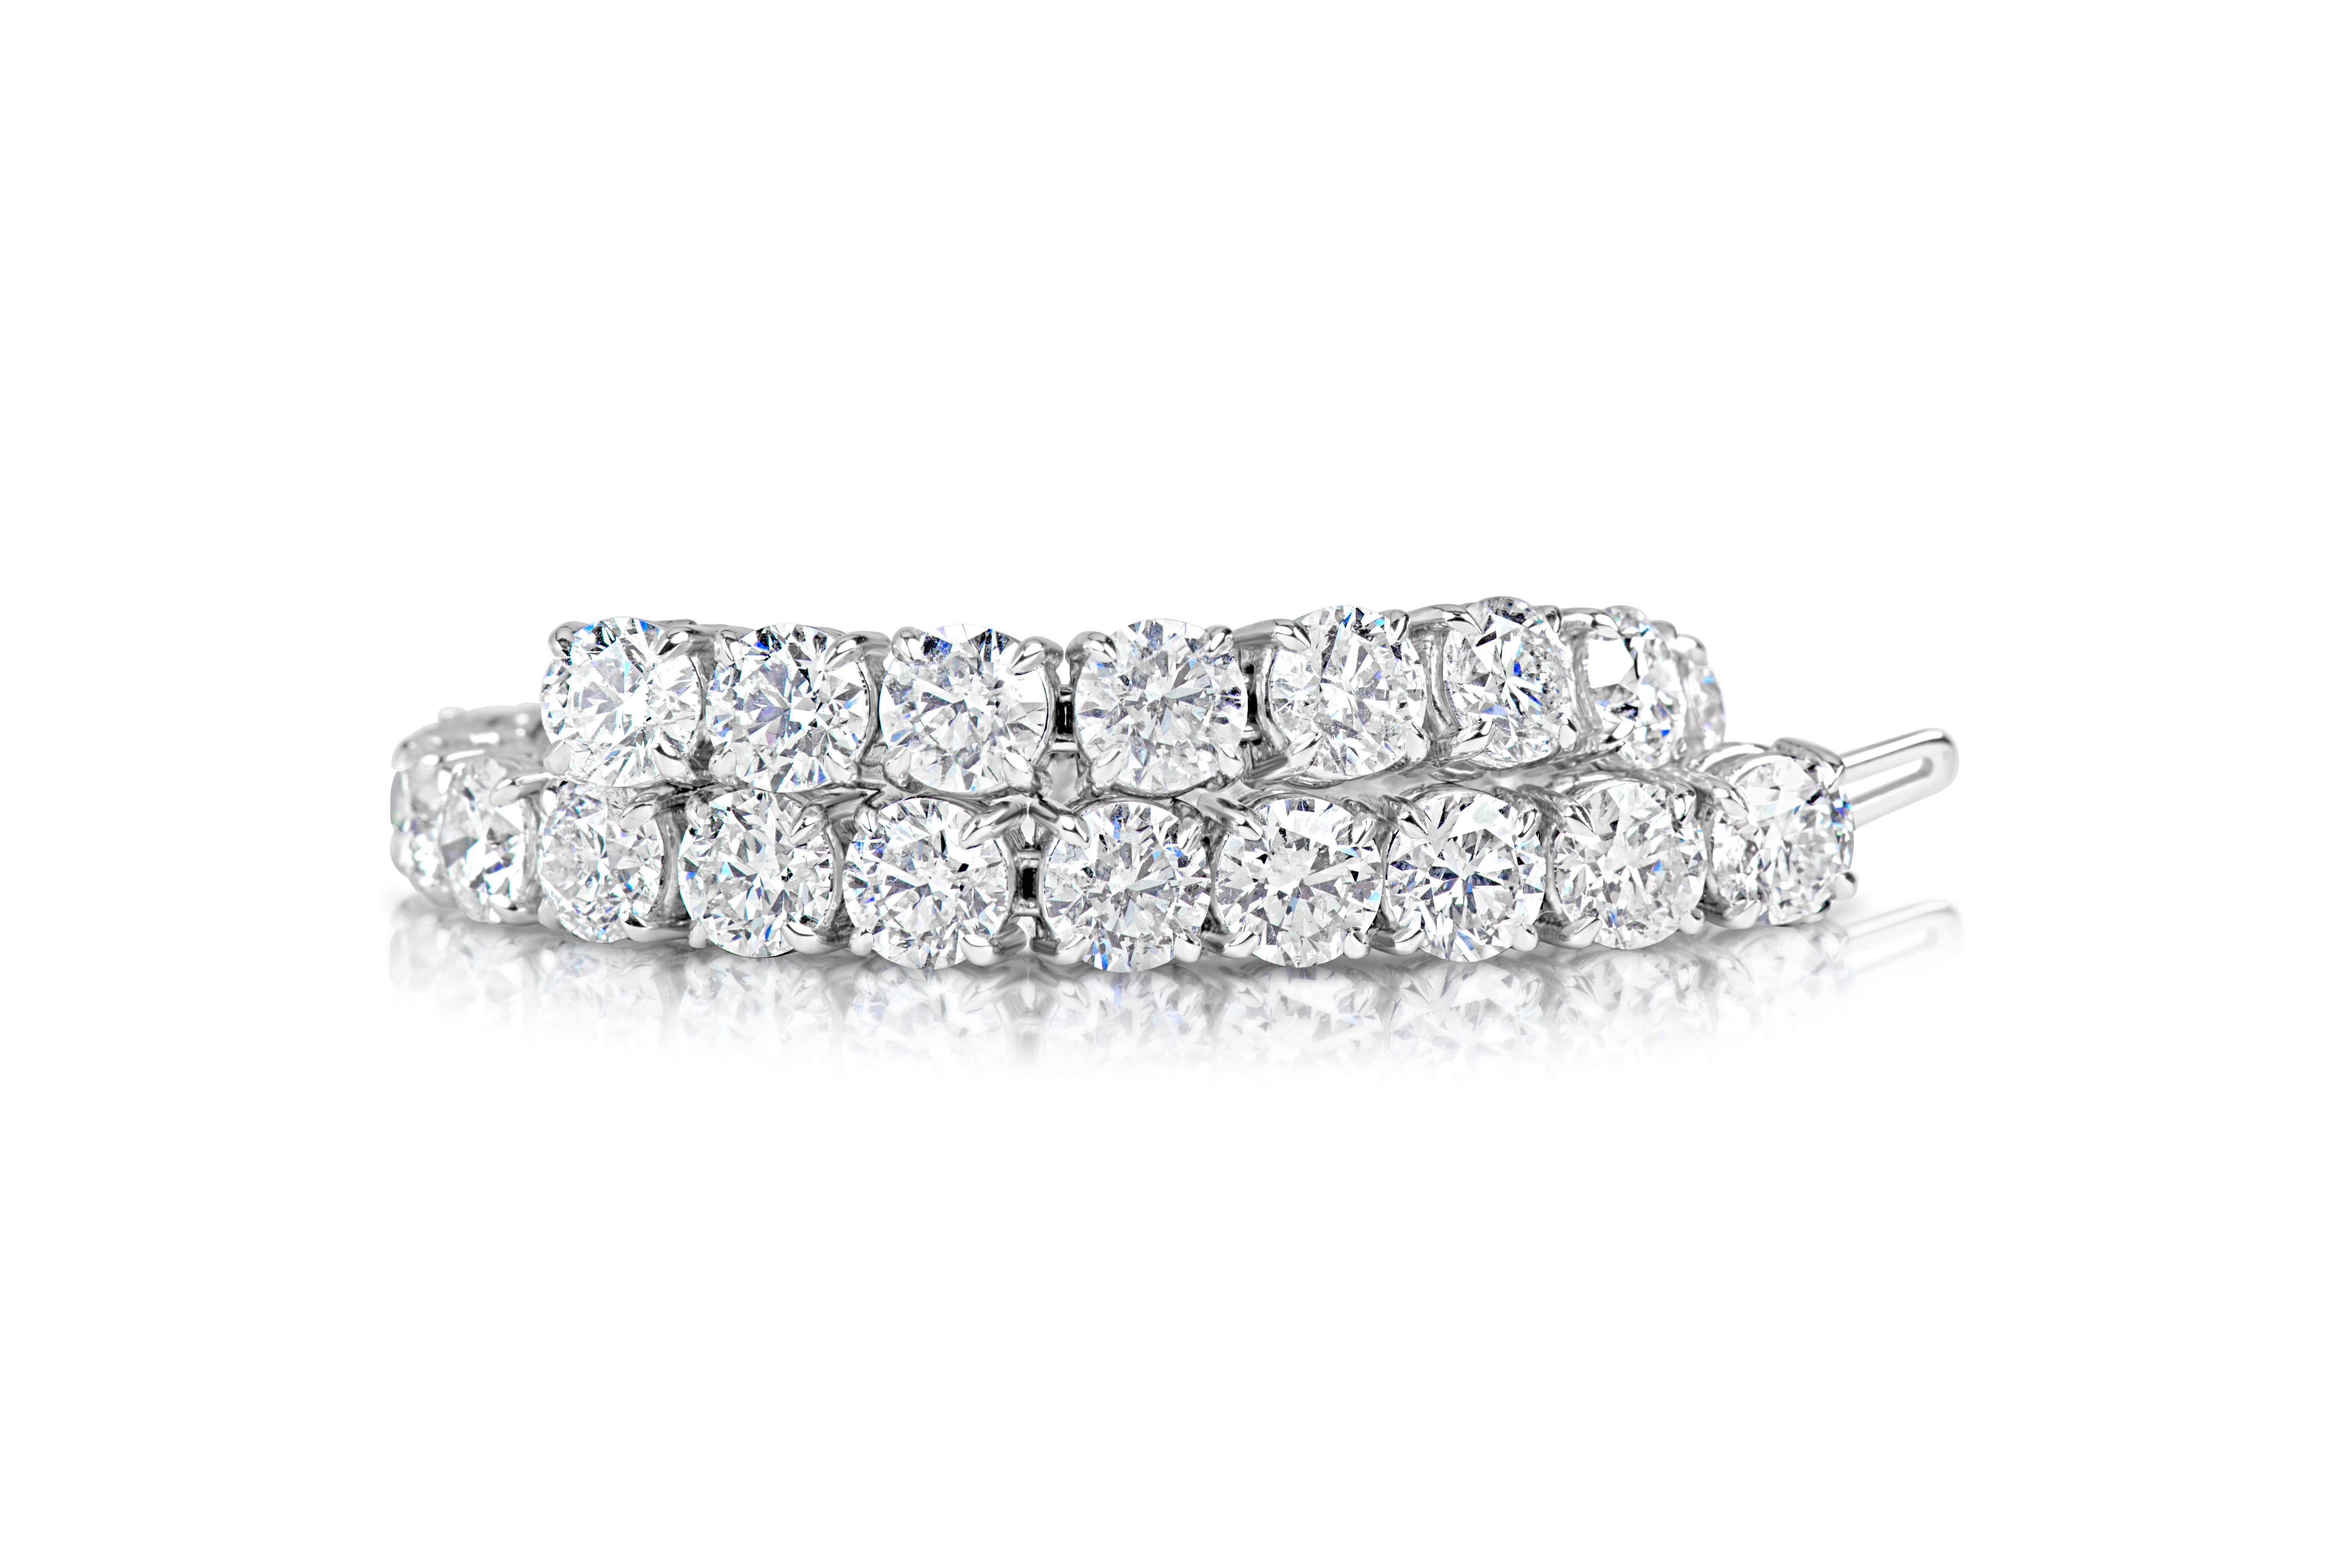 This Superb Classic Diamond Bracelet features 38 diamonds
Weight: 12.00 Cts.
Metal: 14k
Color: G-H
Clarity: SI